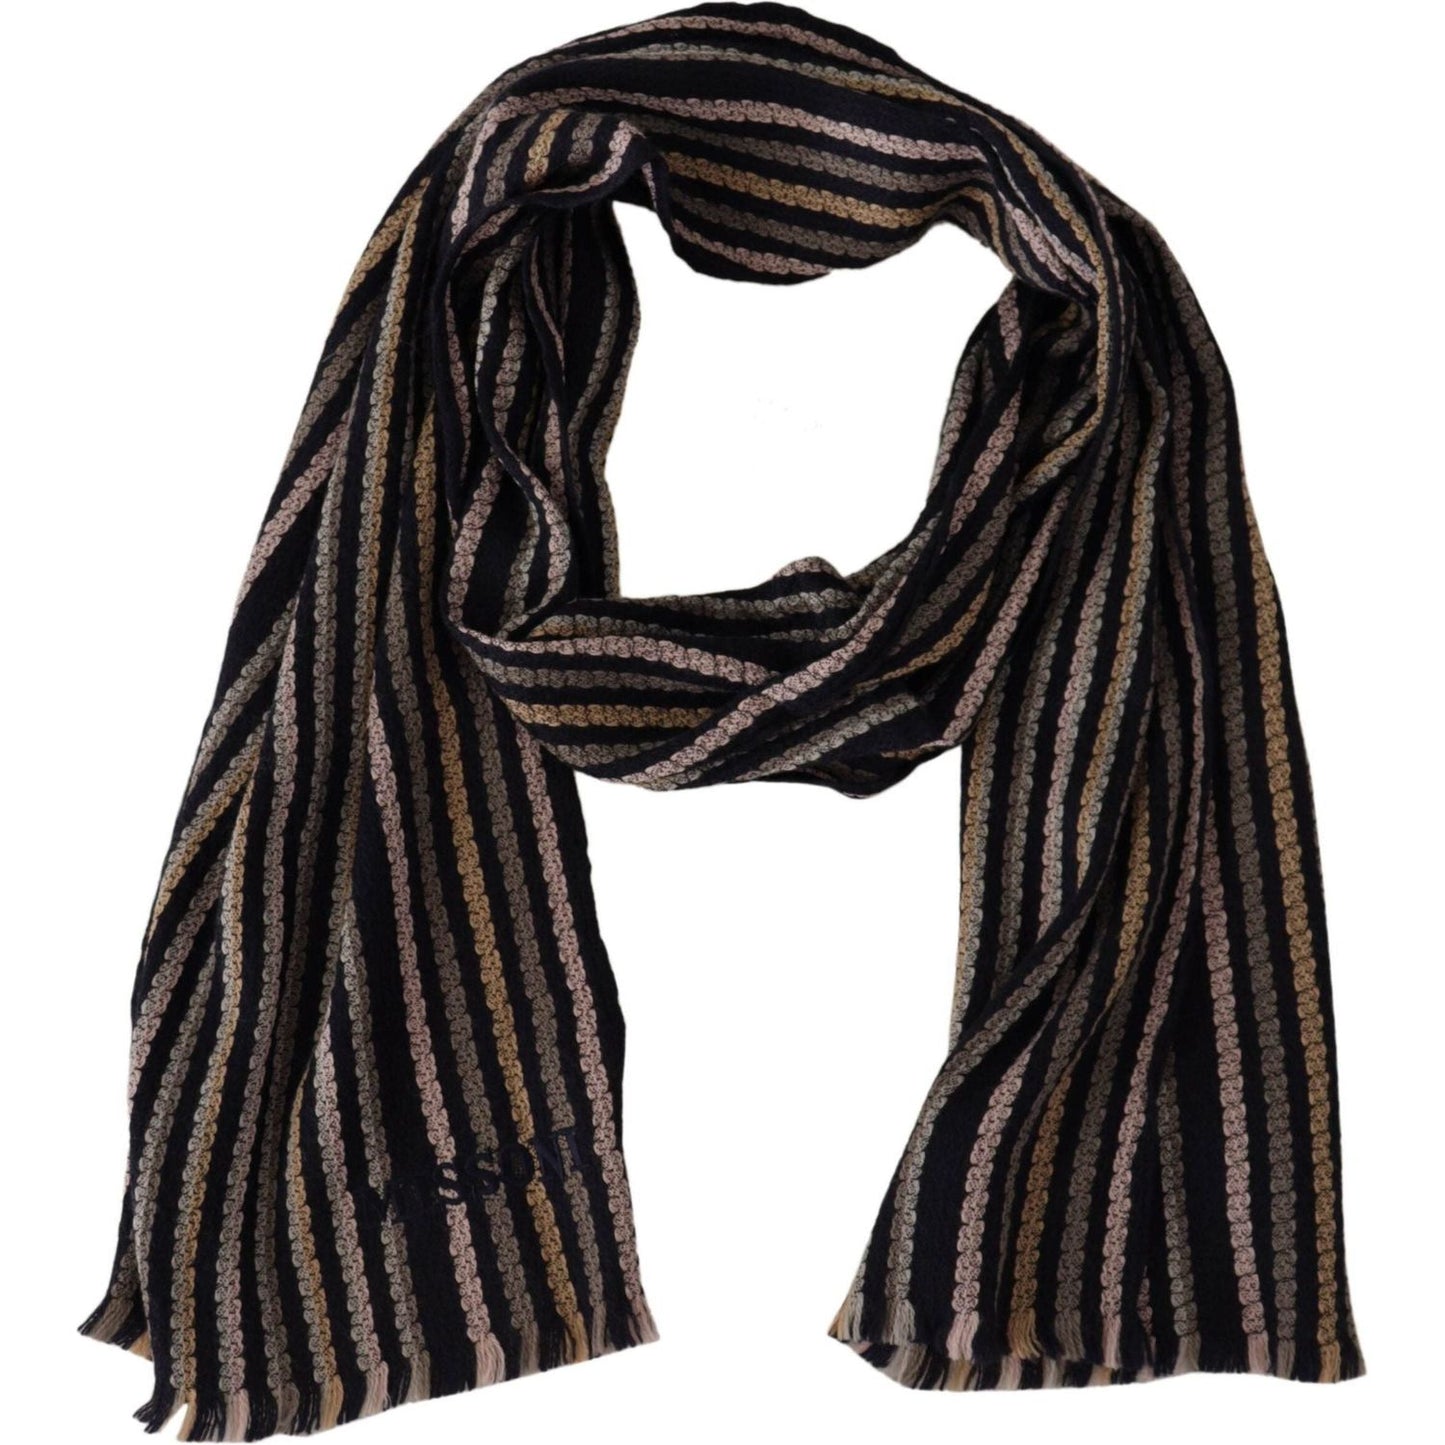 Missoni Authentic Multicolor Wool Mens Scarf multicolor-stripes-wool-knit-fringe-shawl-scarf